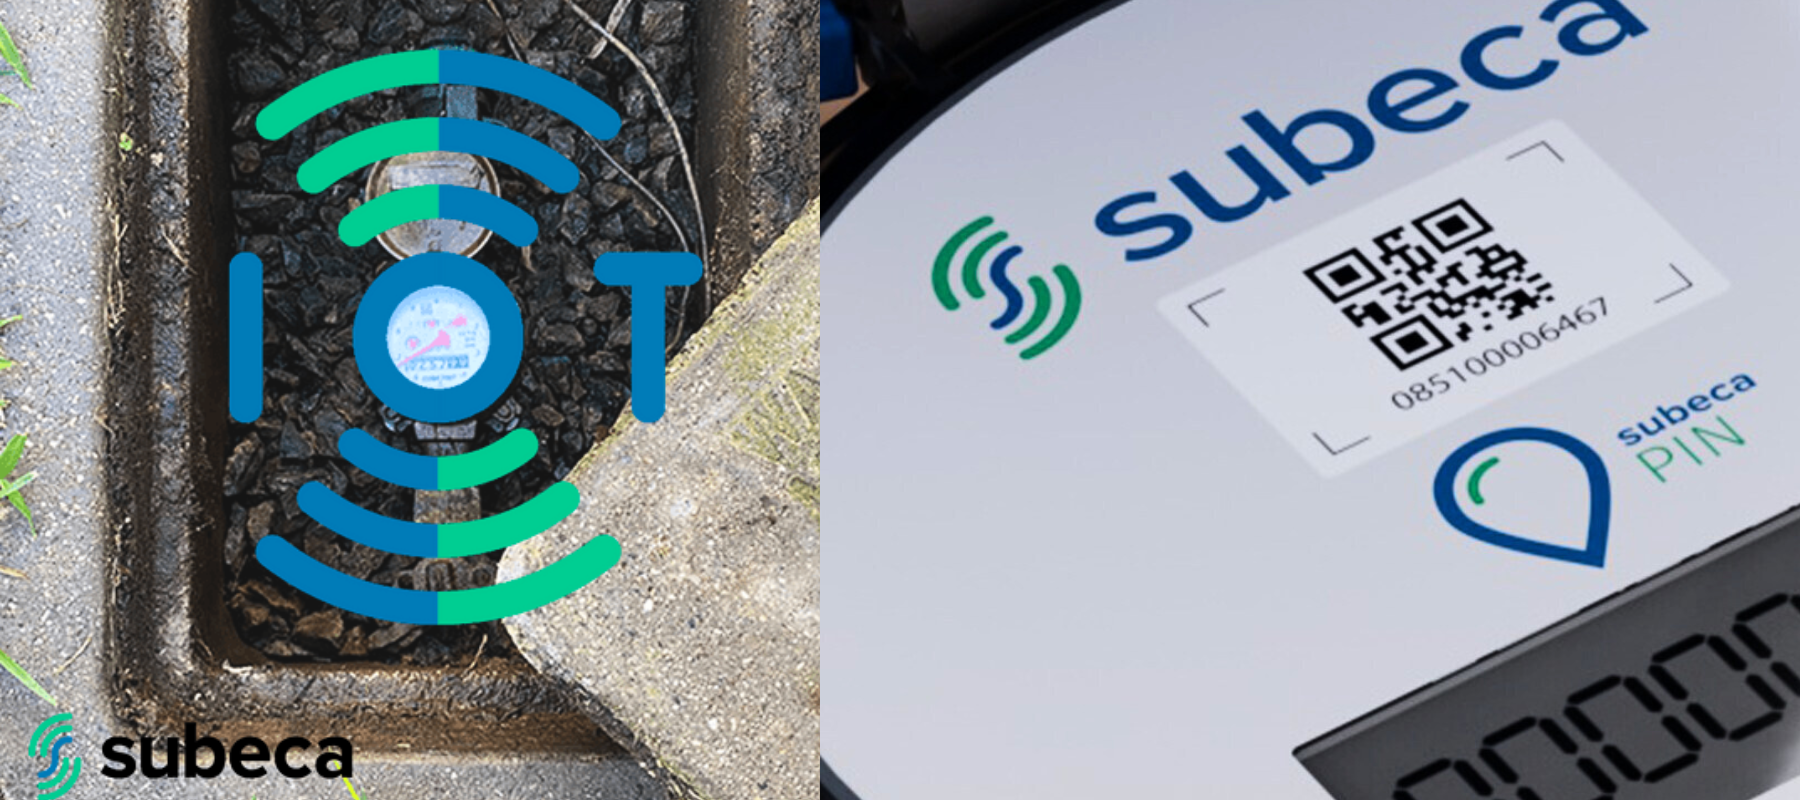 IoT startup Subeca raises $6m Series A to scale deployment of low-cost, easy-to-use water technology